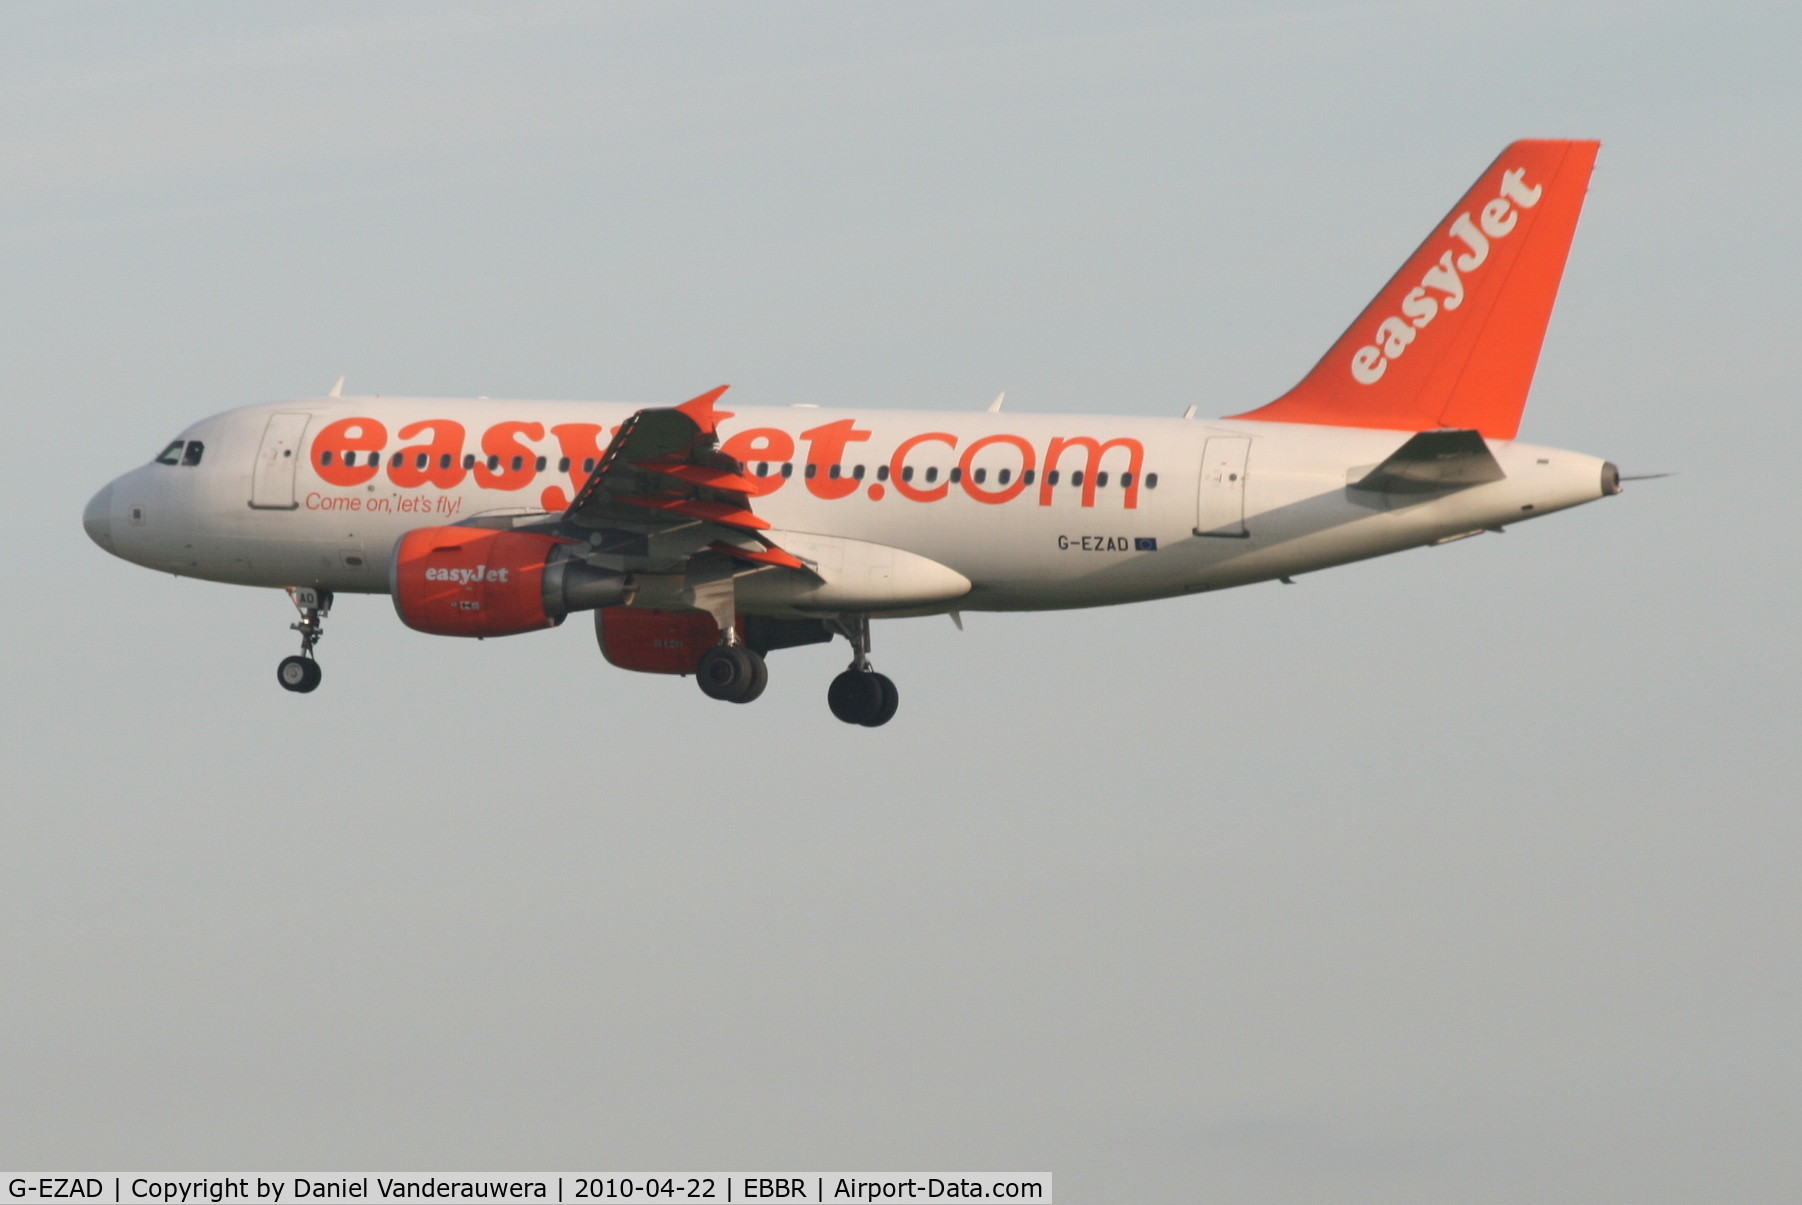 G-EZAD, 2006 Airbus A319-111 C/N 2702, Descending to RWY 25L